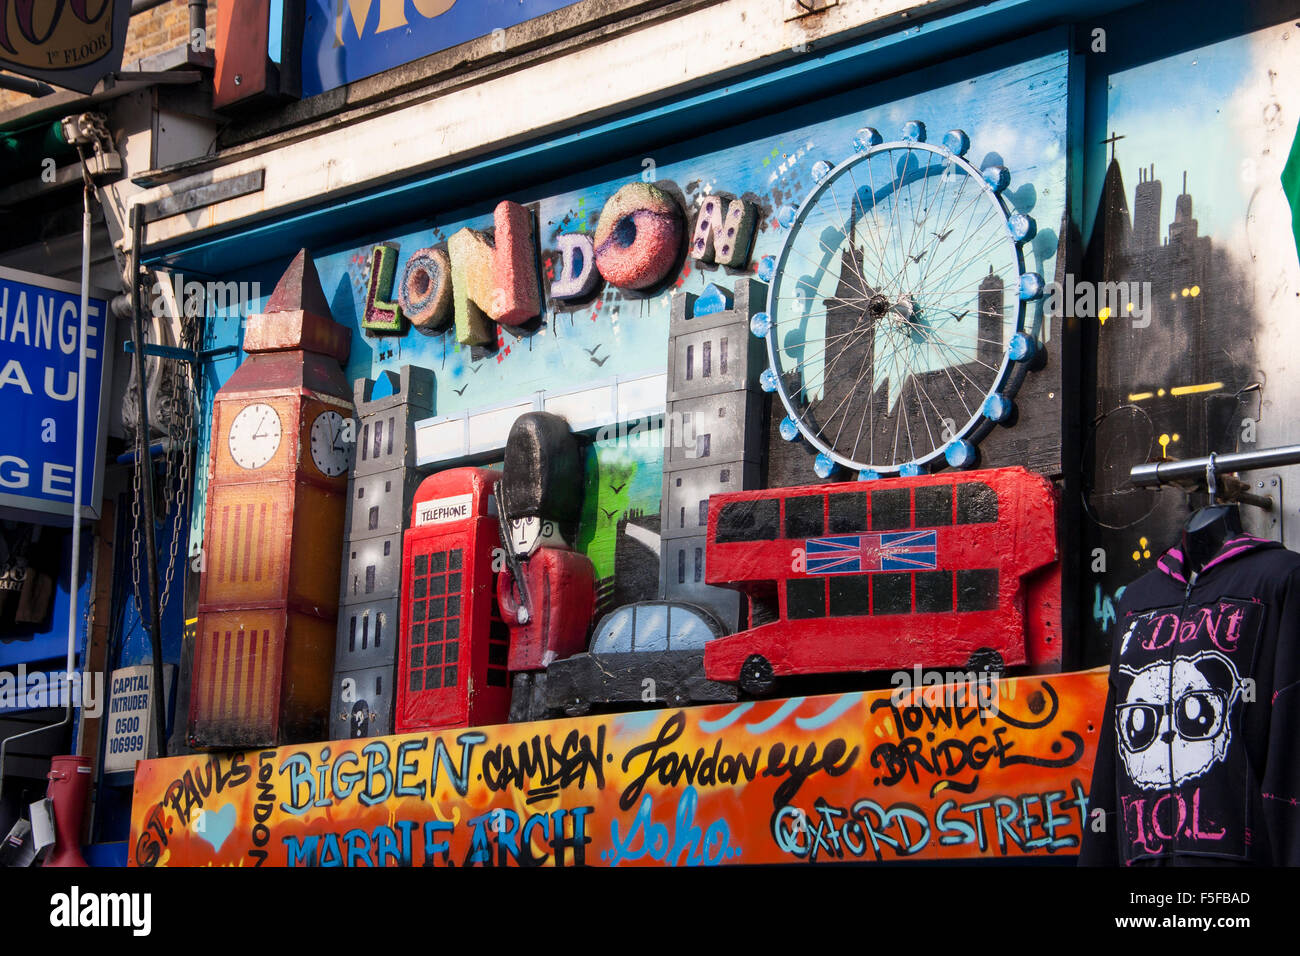 London icons Big Ben London Eye Tower Bridge Guards police taxis red buses etc on shop front Camden London England UK Stock Photo